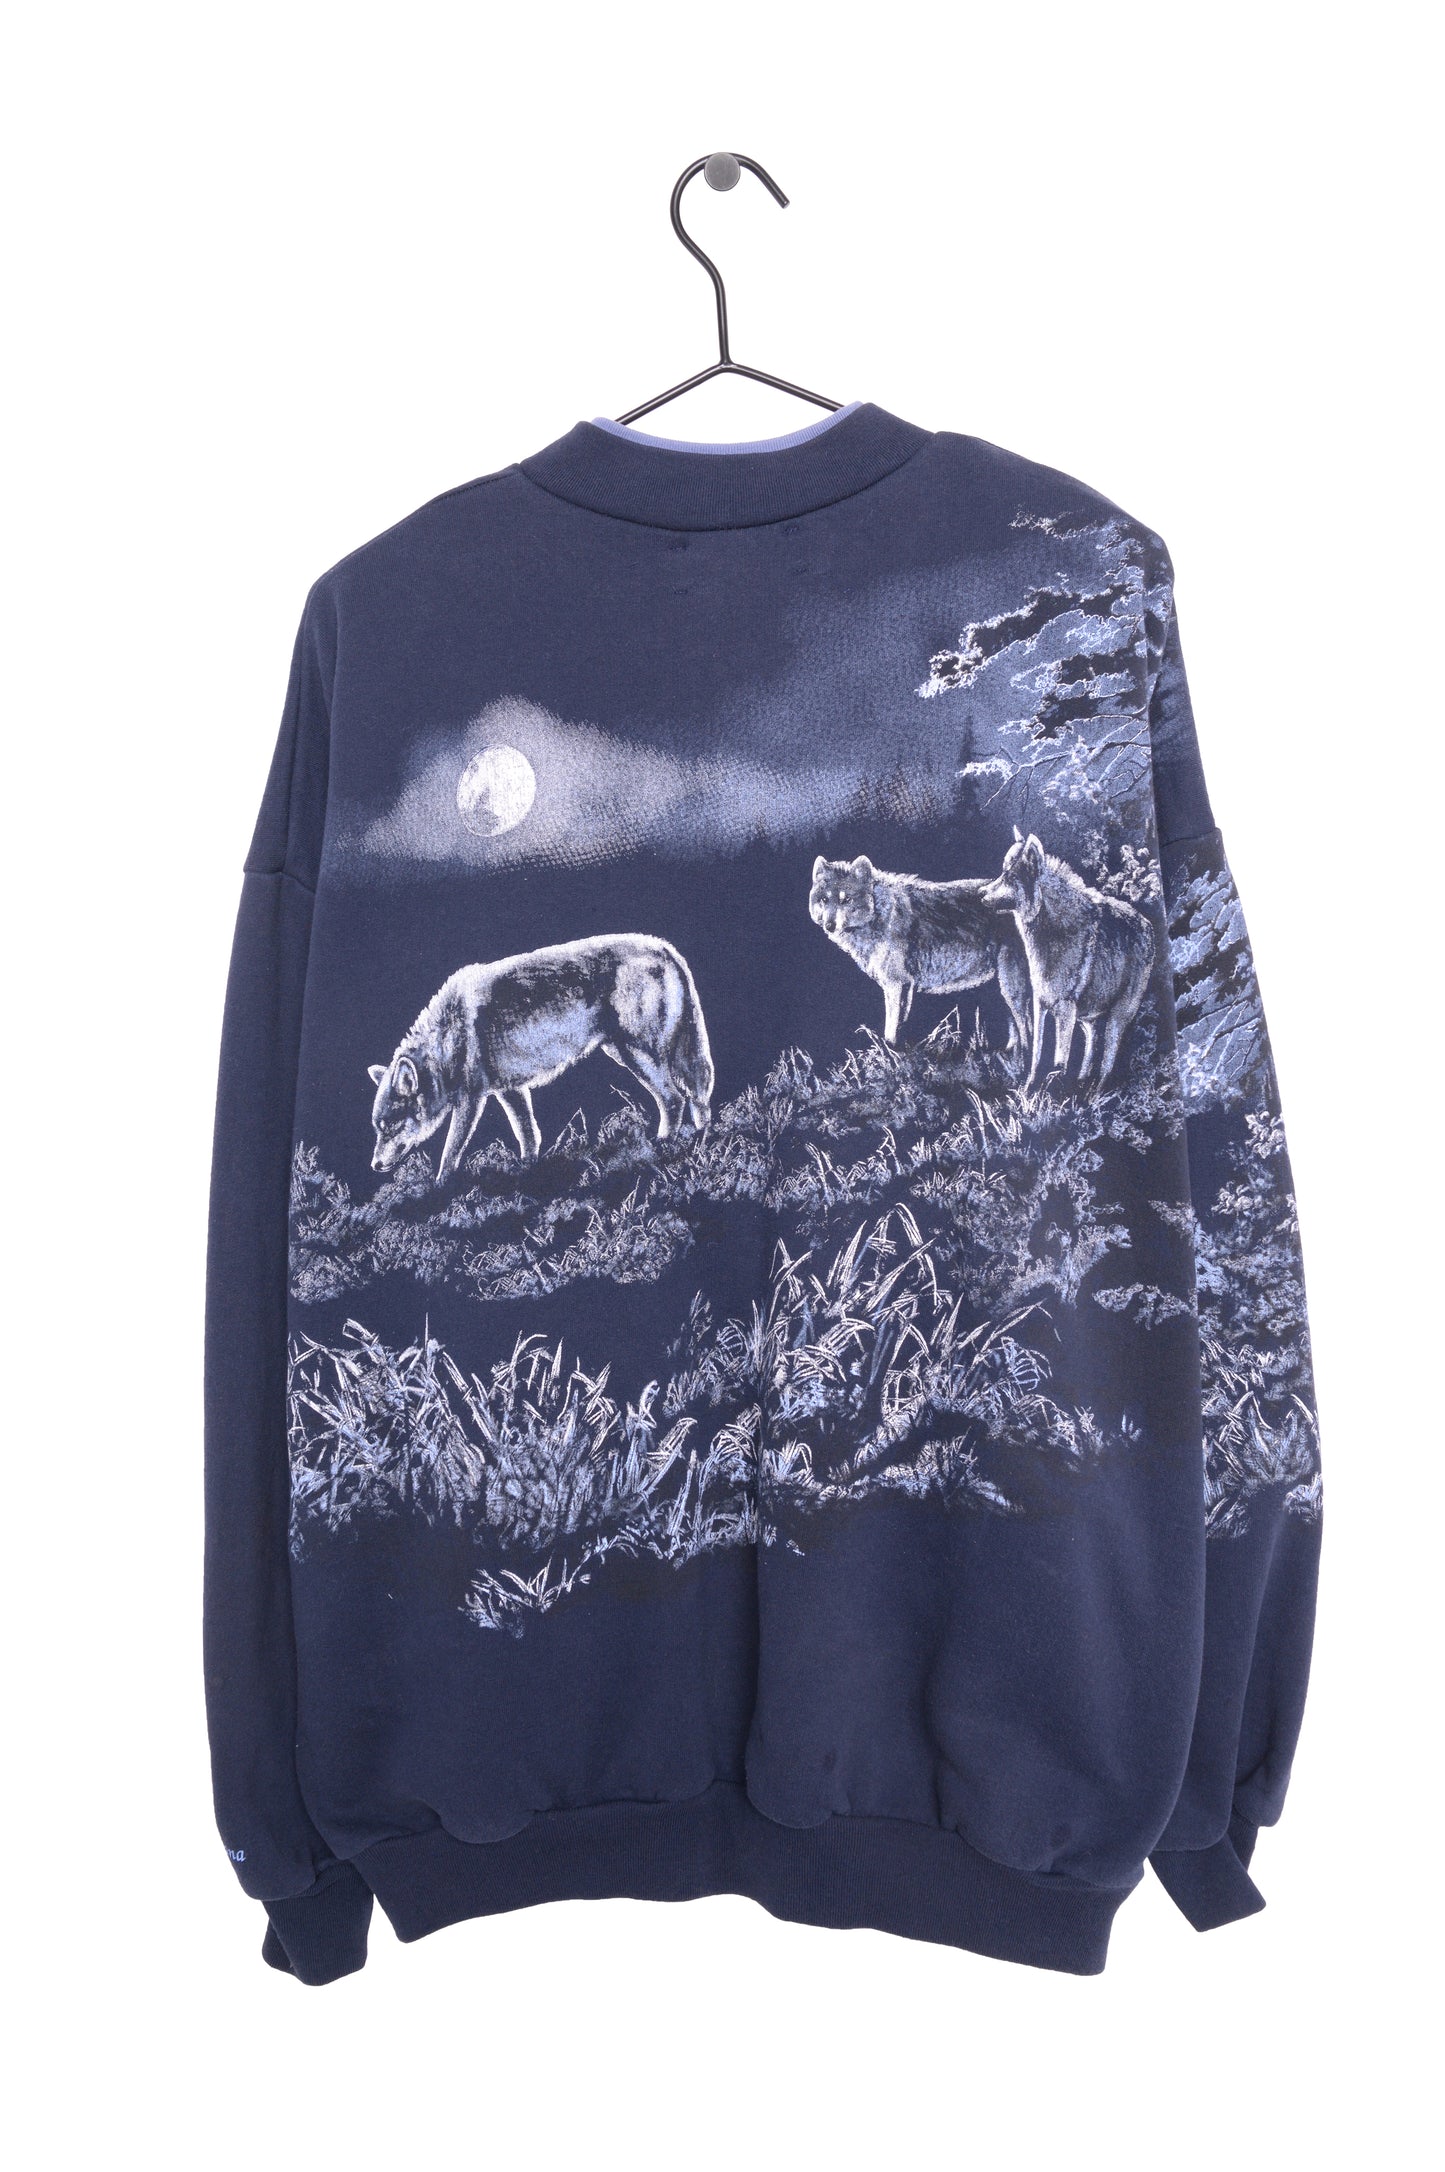 Wolves All-Over Sweatshirt USA